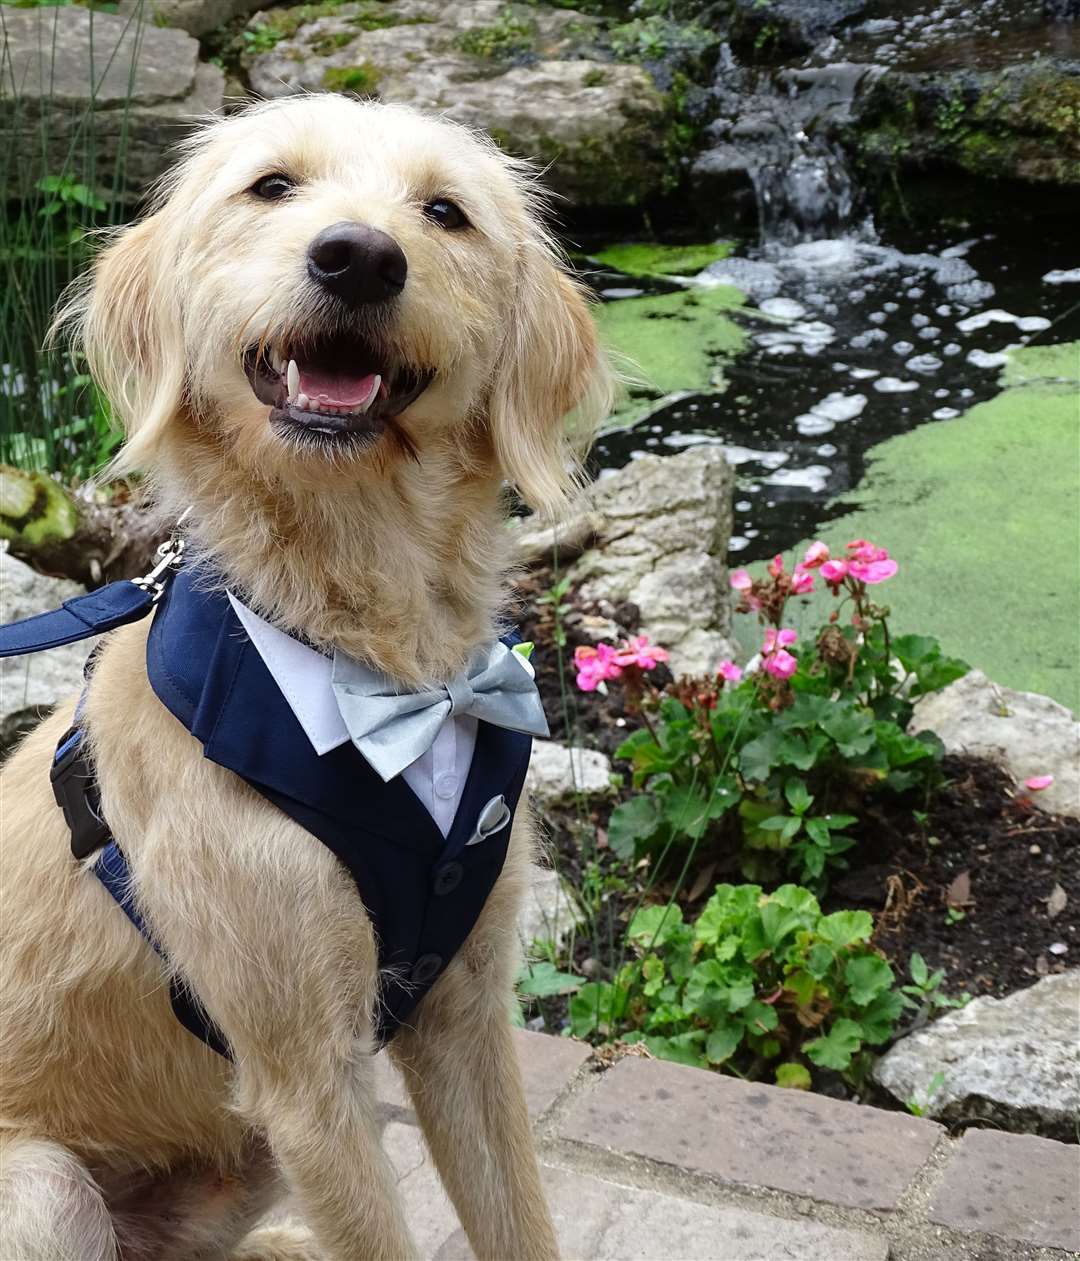 This good dog had a specially made bow tie harness Picture: Furrytail Weddings